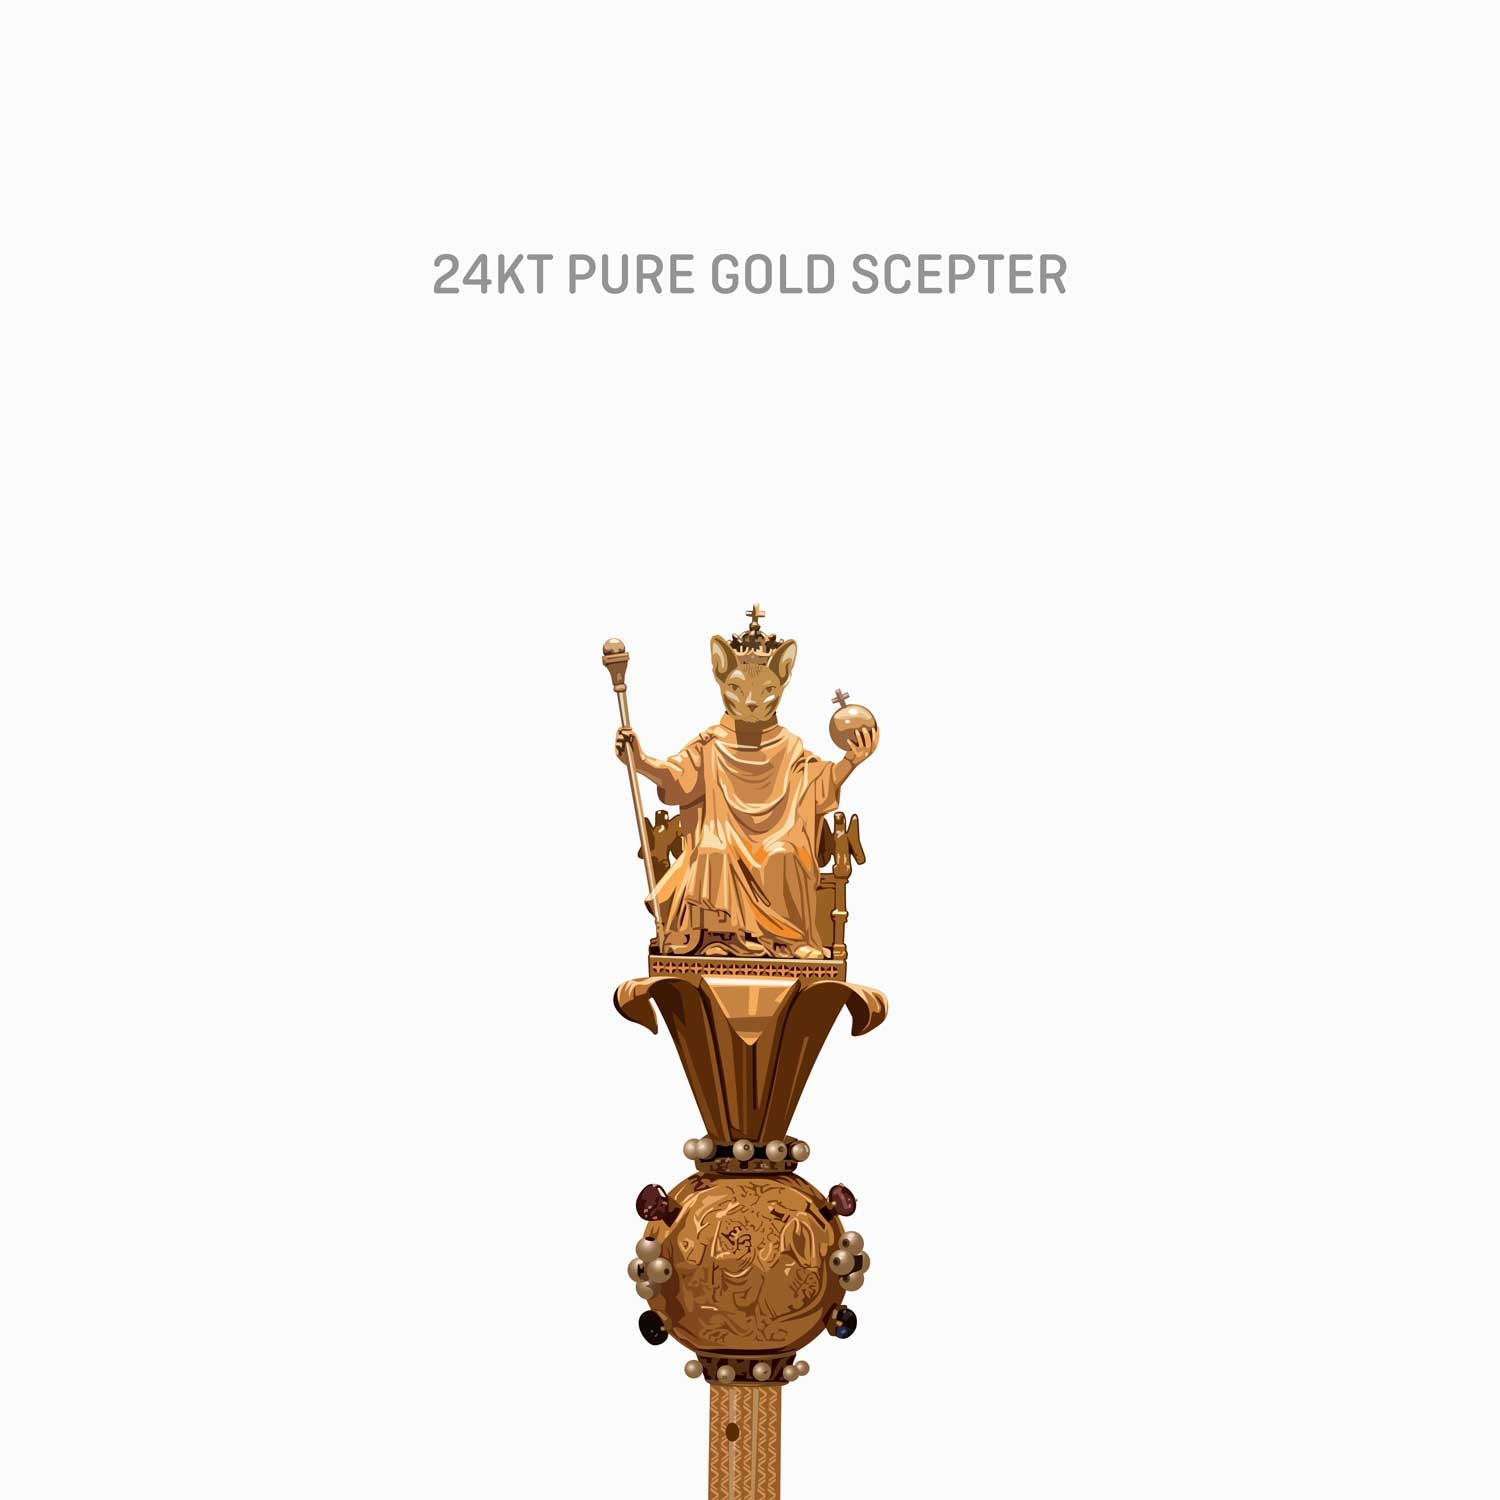 24kt pure gold scepter